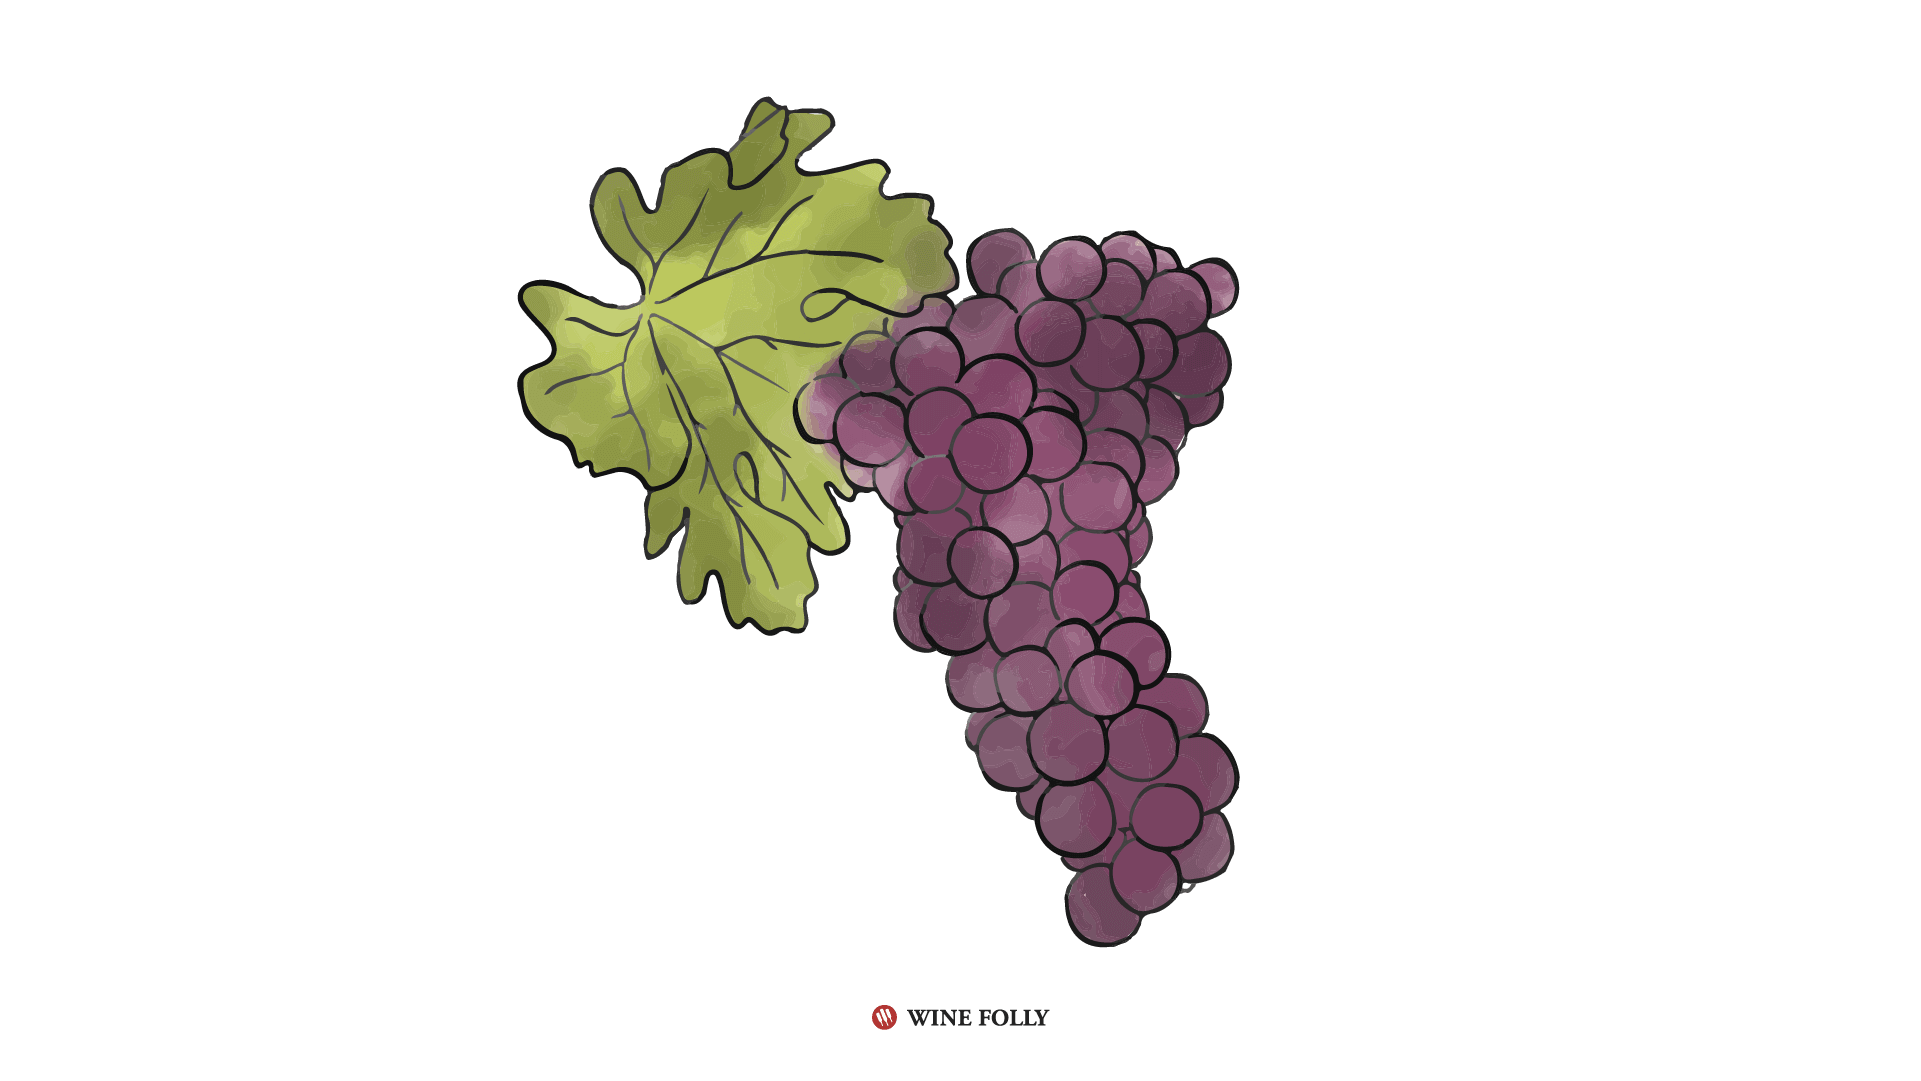 Better together and defining Cabernet Sauvignon